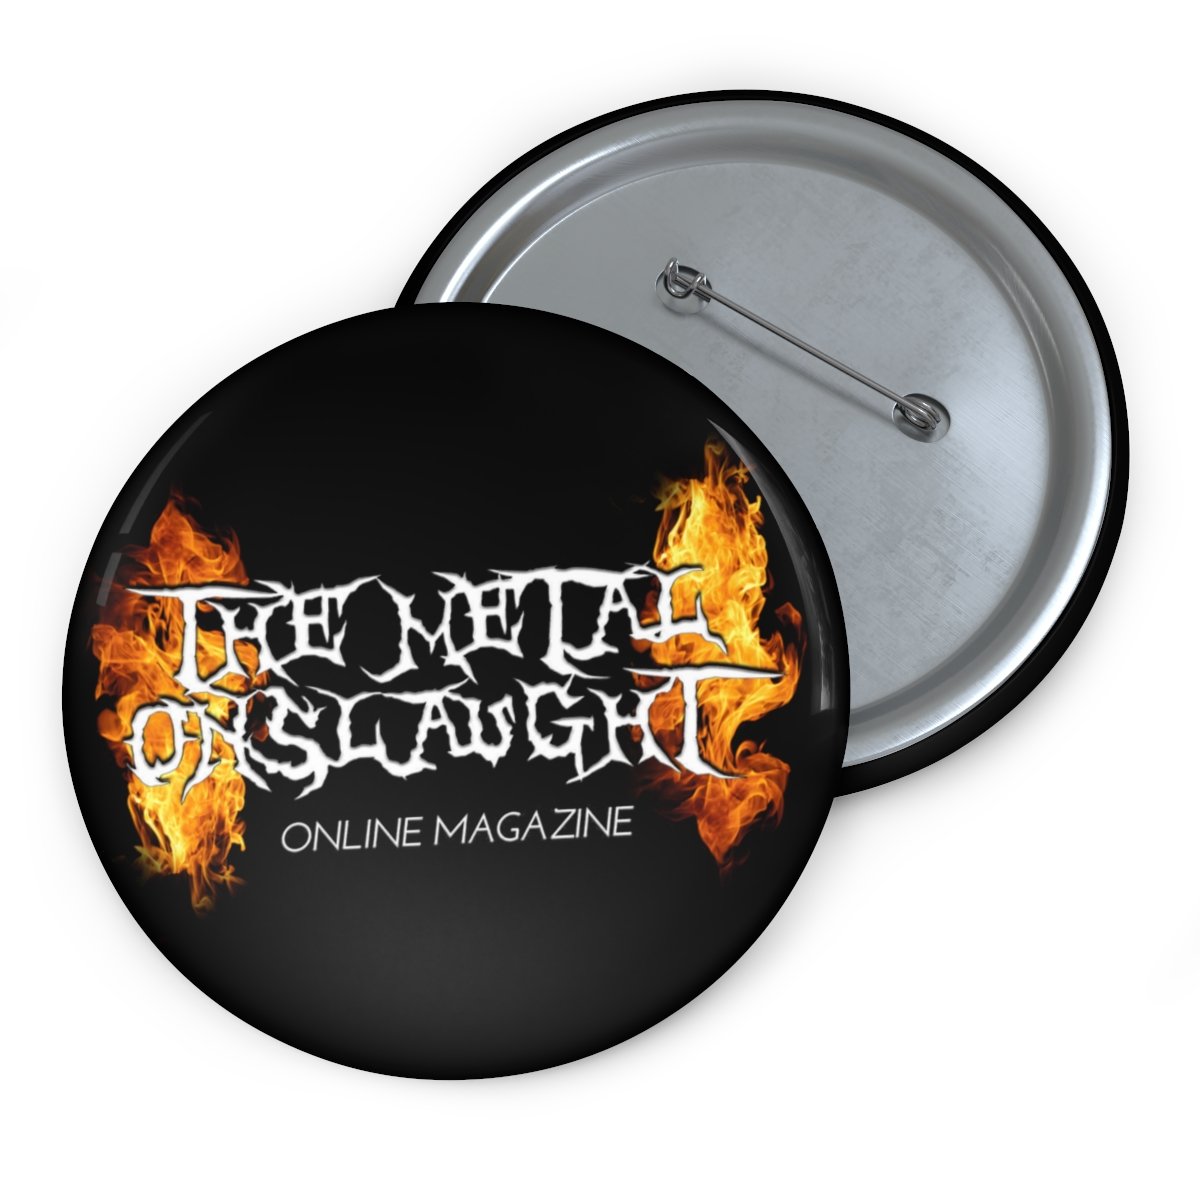 The Metal Onslaught Magazine Pin Buttons